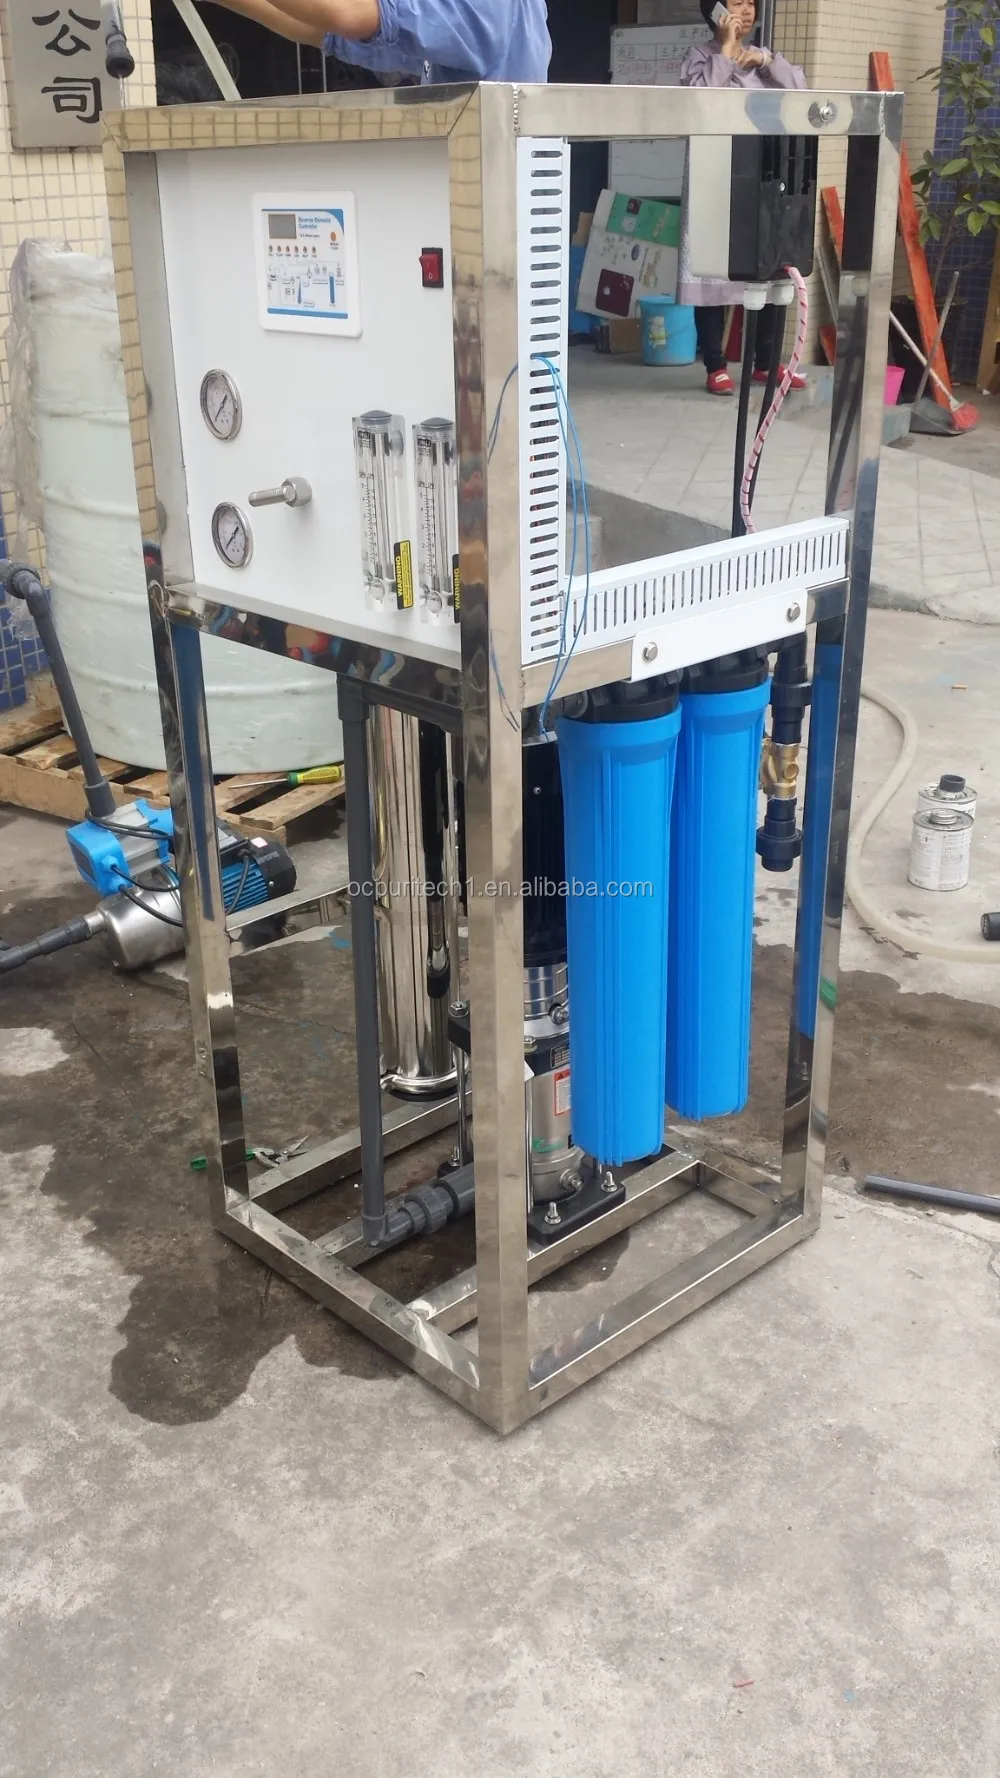 250LPH 1500GPD Small RO water treatment plant for sale